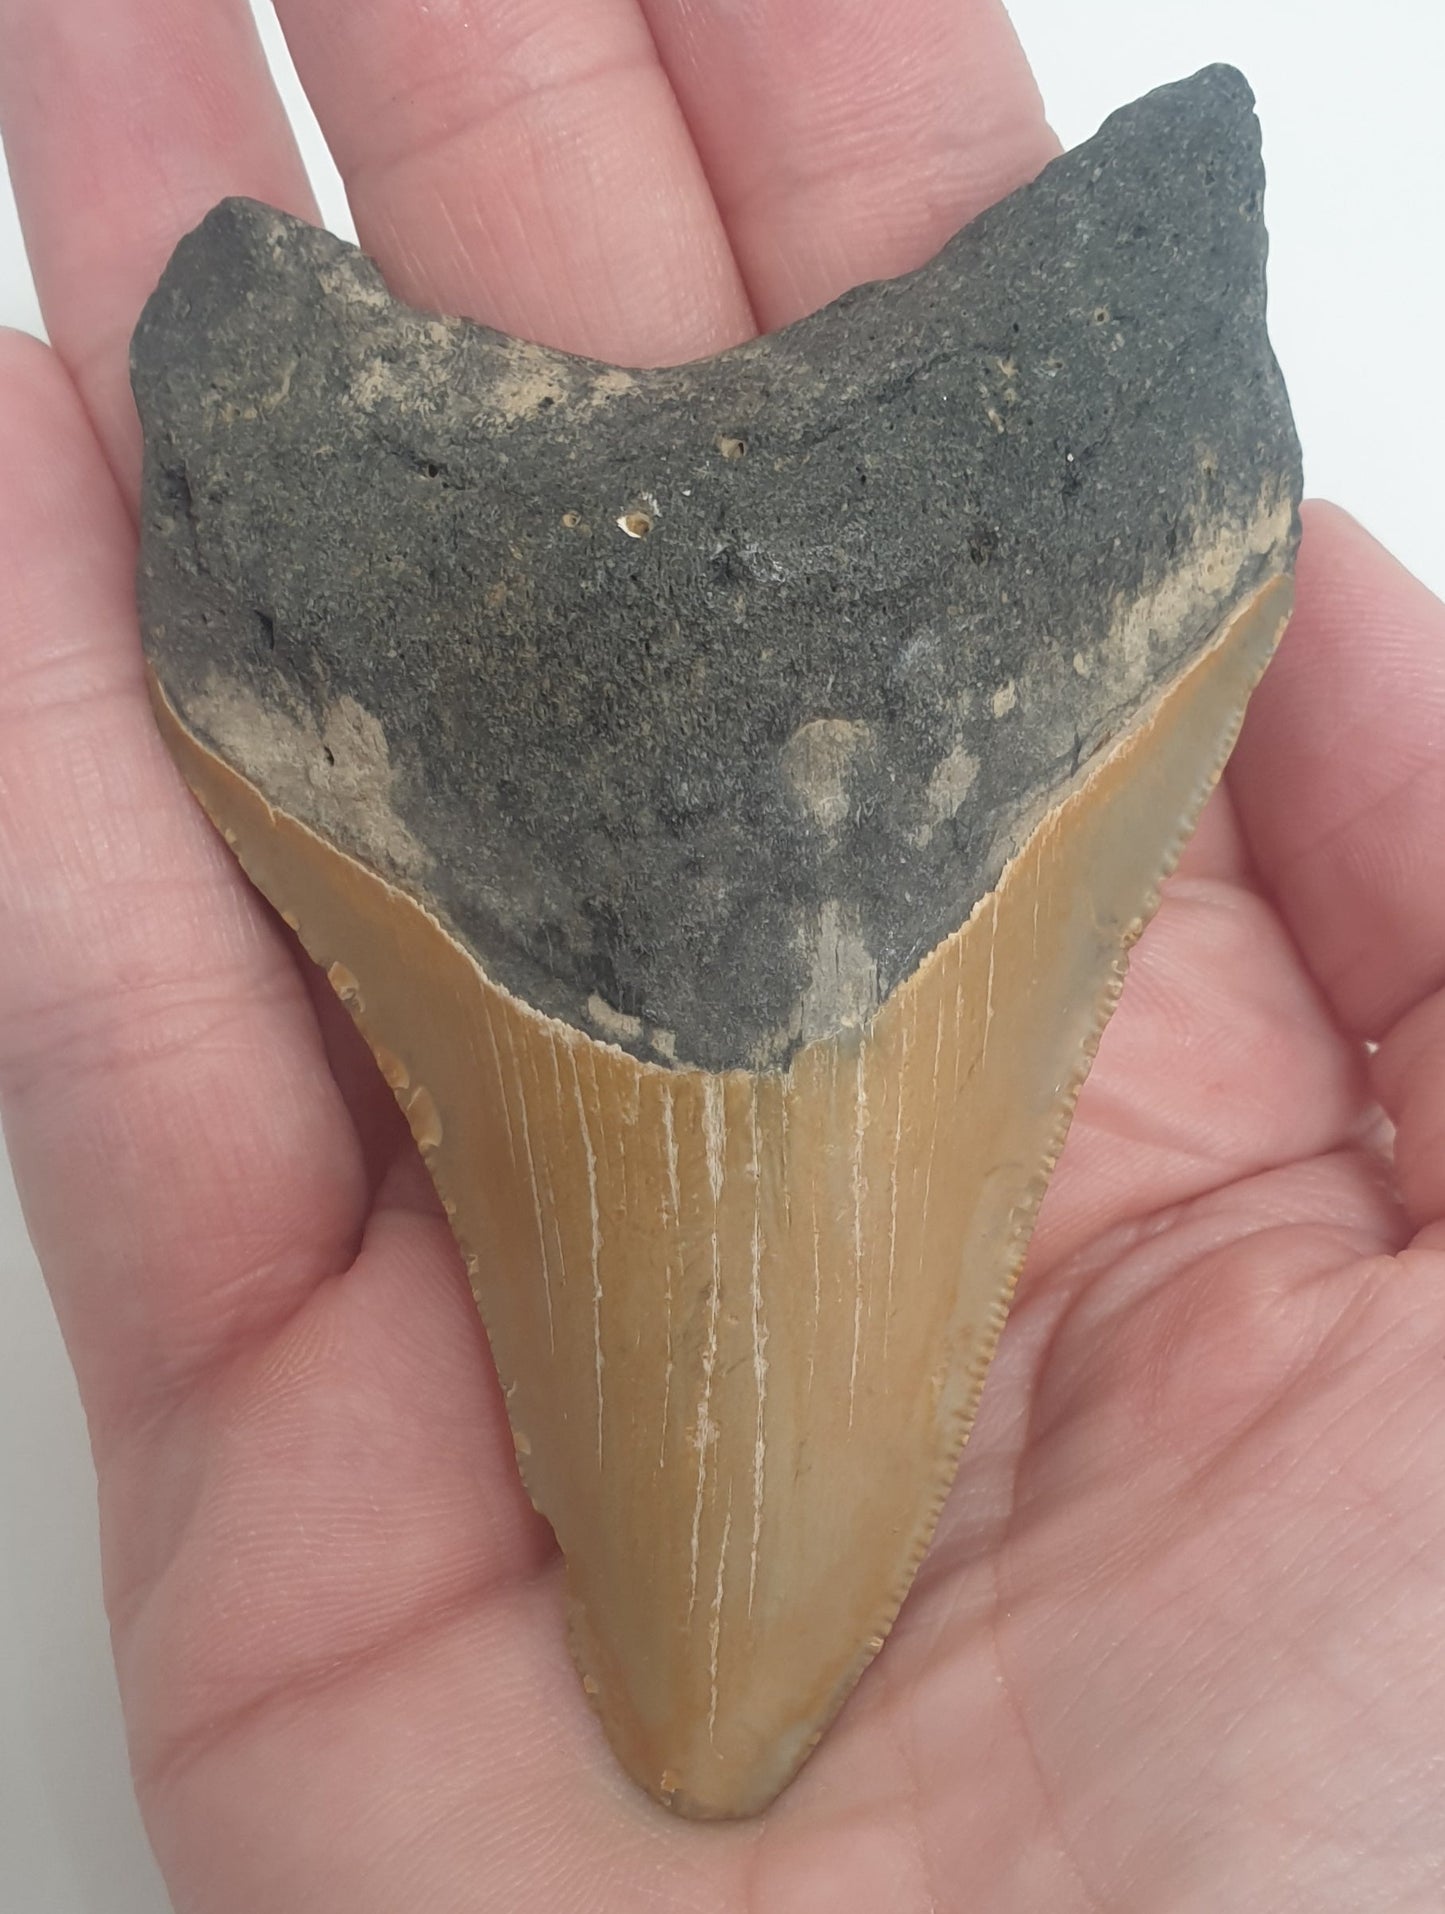 11.7cm Serrated Megalodon Tooth from the USA (2.6 - 15 million years)